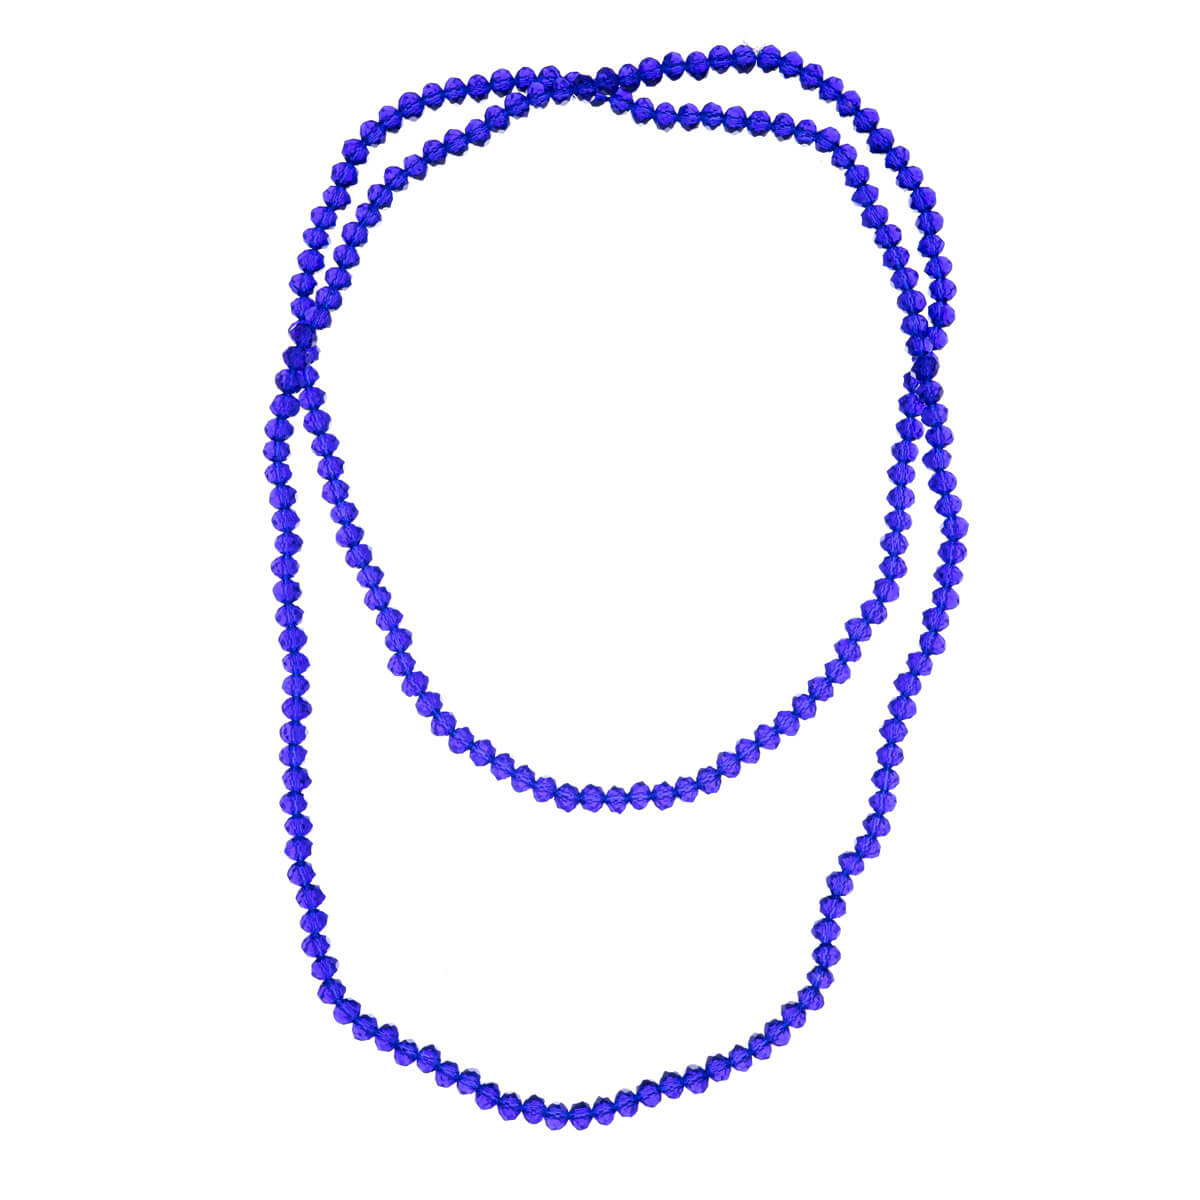 Long neck beads beaded glass bead necklace 100cm